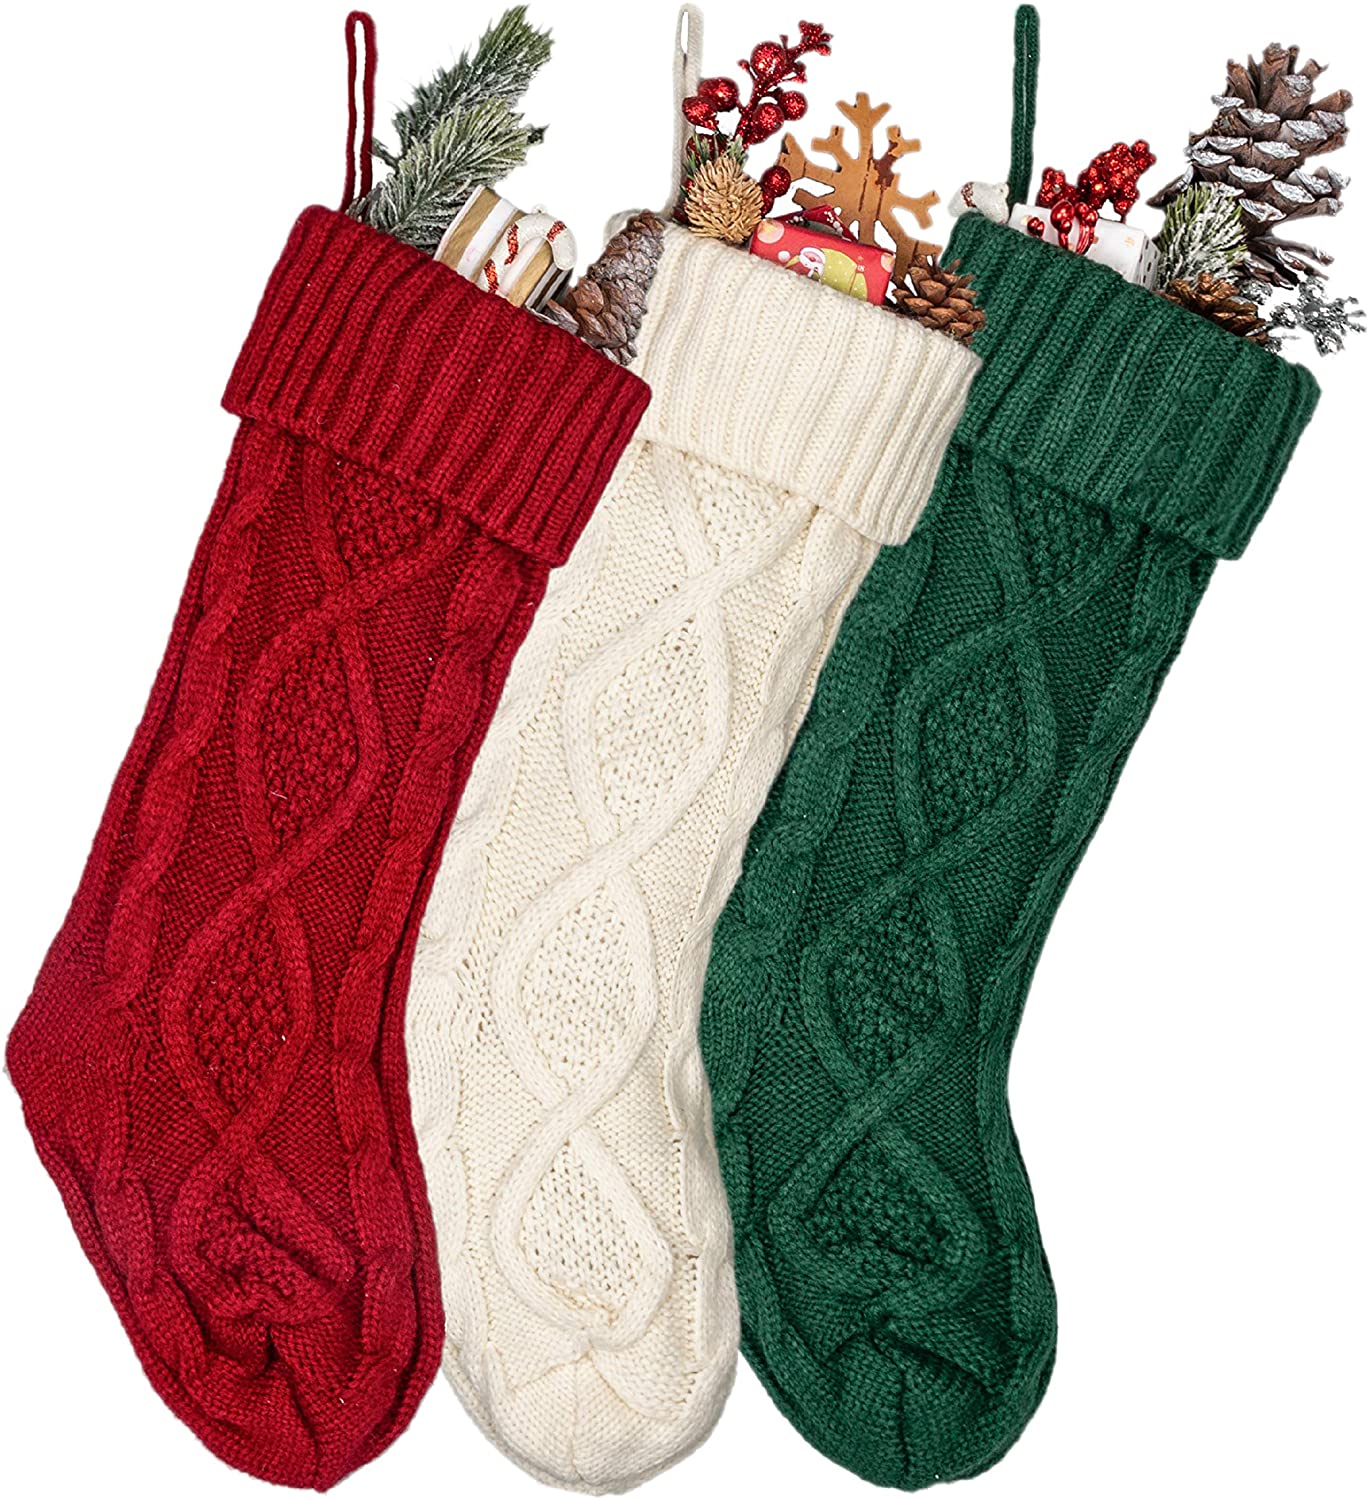 Set of 3 ABSOFINE Christmas Knit Stockings 18 inch Large Stocking Christmas Hanging Decorations White Red Green for Home Xmas Holiday Decorations 